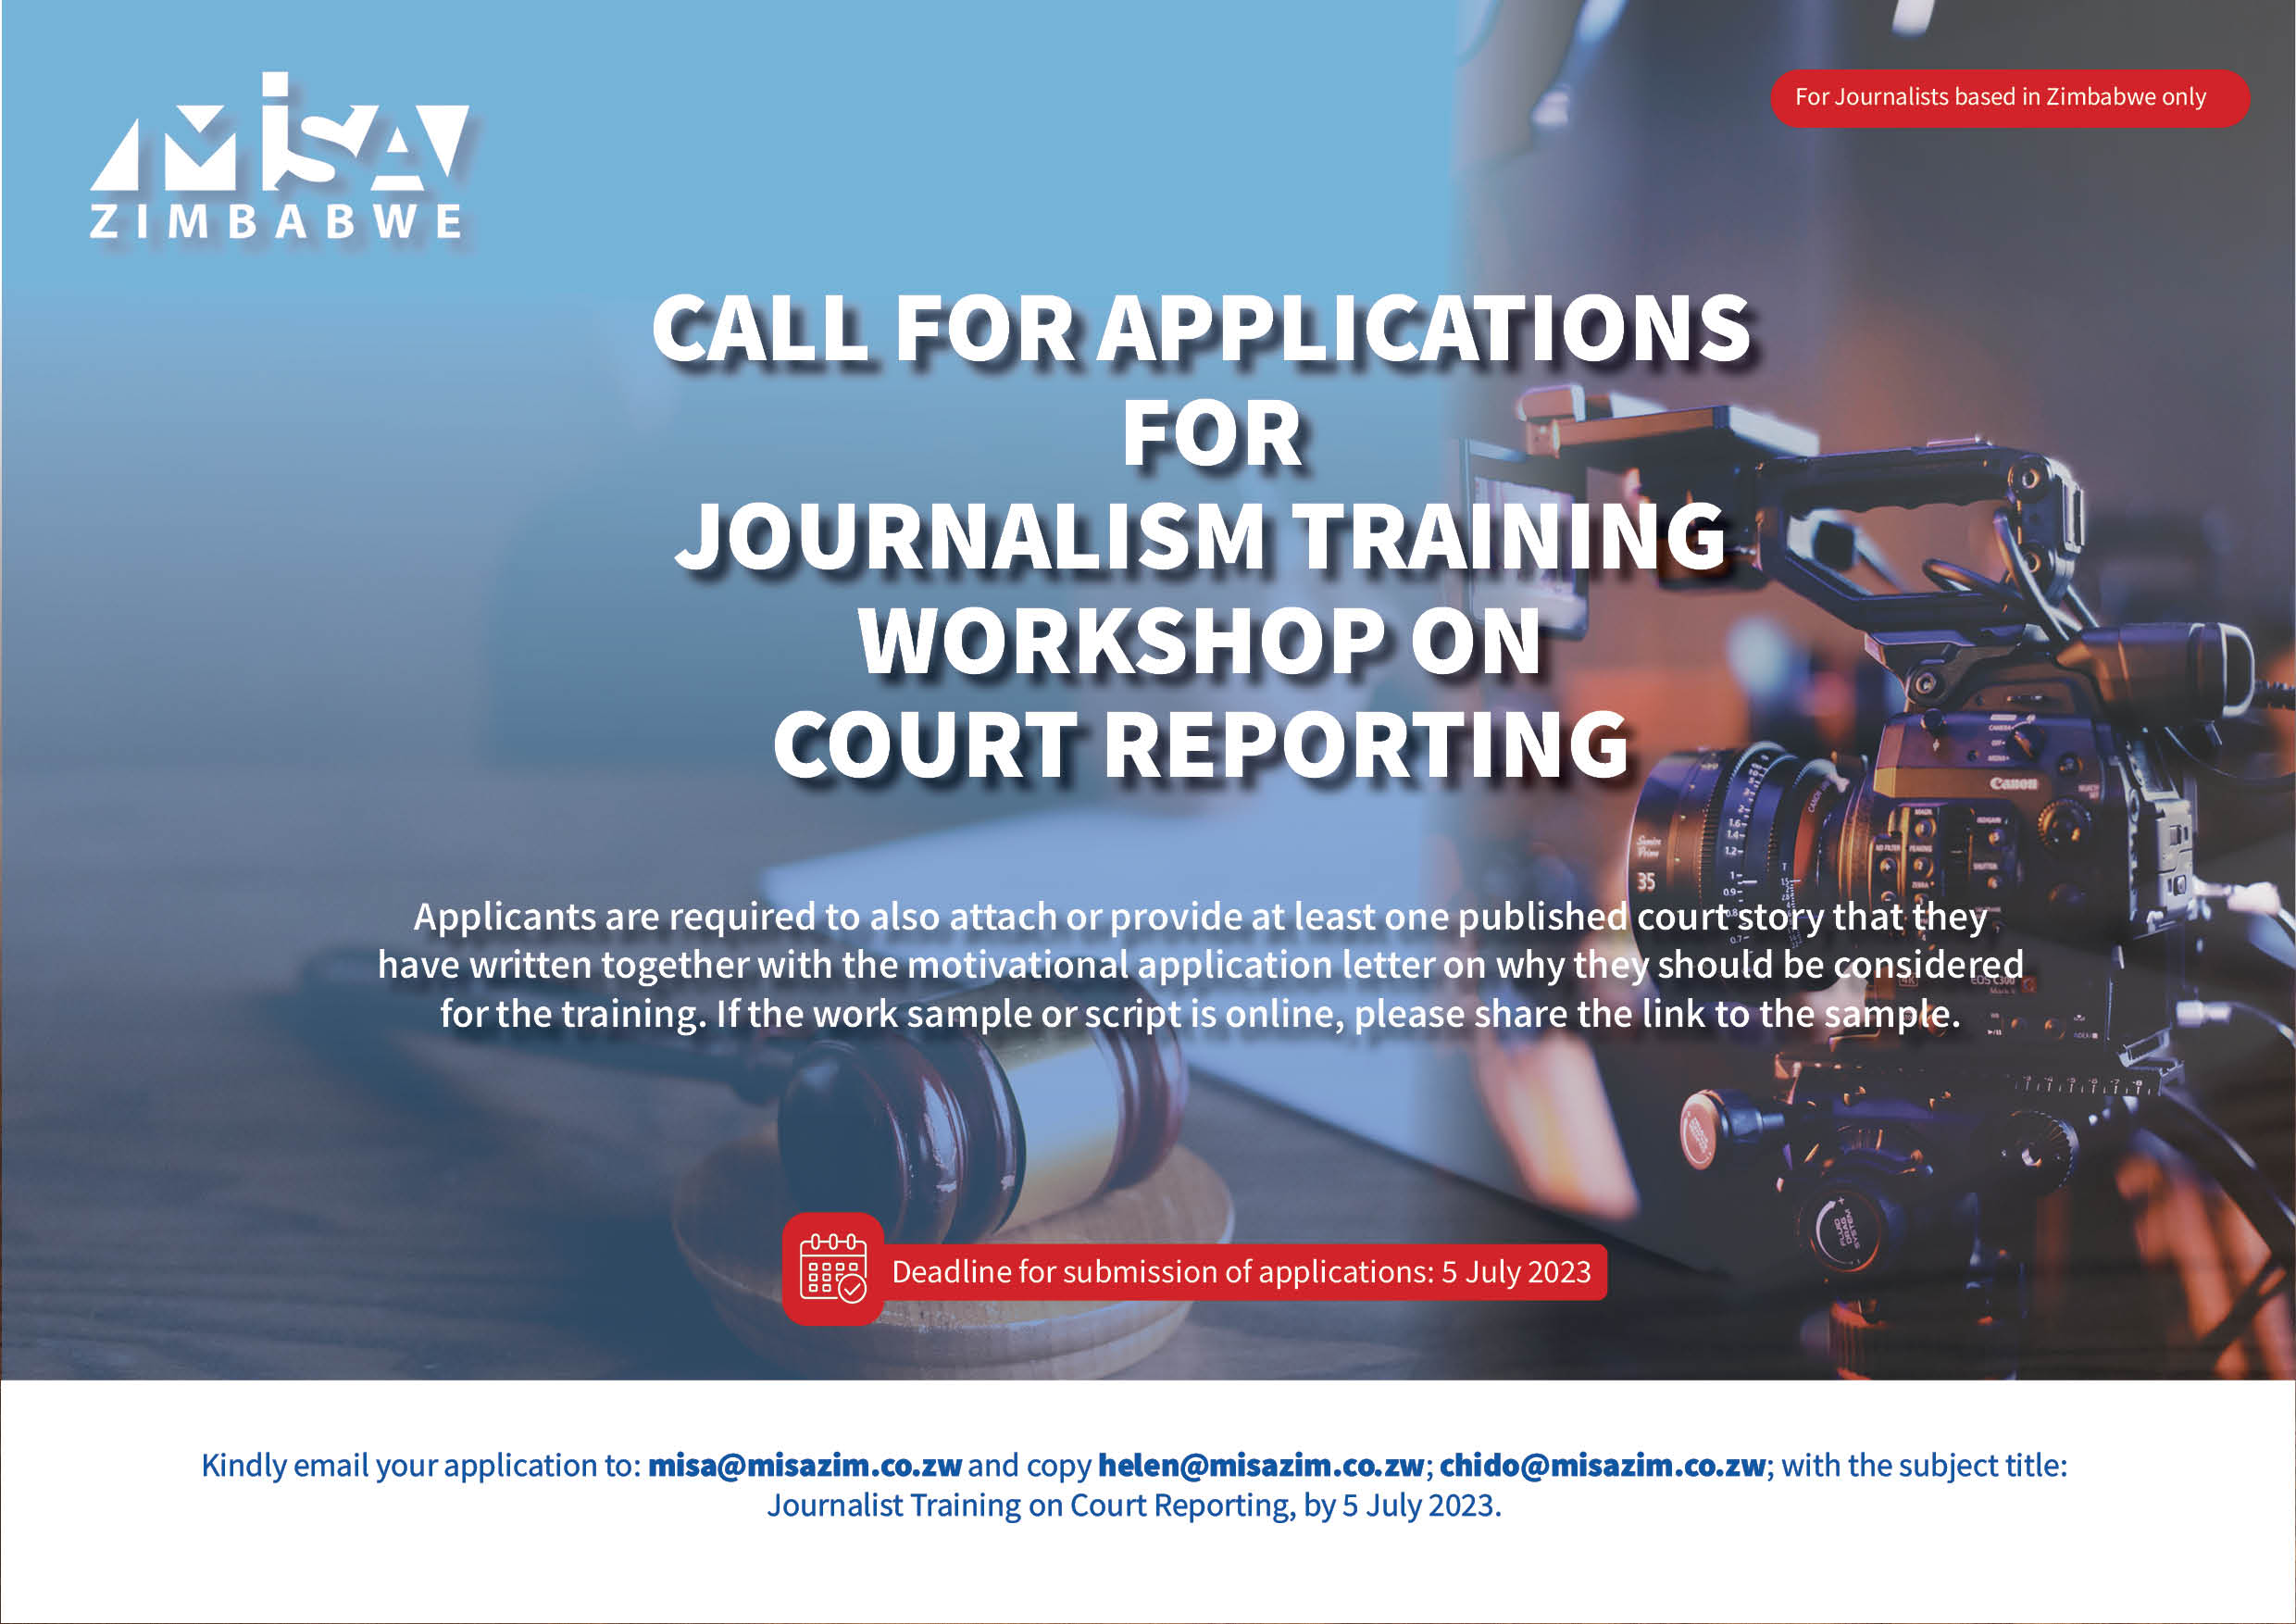 CALL FOR APPLICATIONS FOR JOURNALISM TRAINING WORKSHOP ON COURT REPORTING 